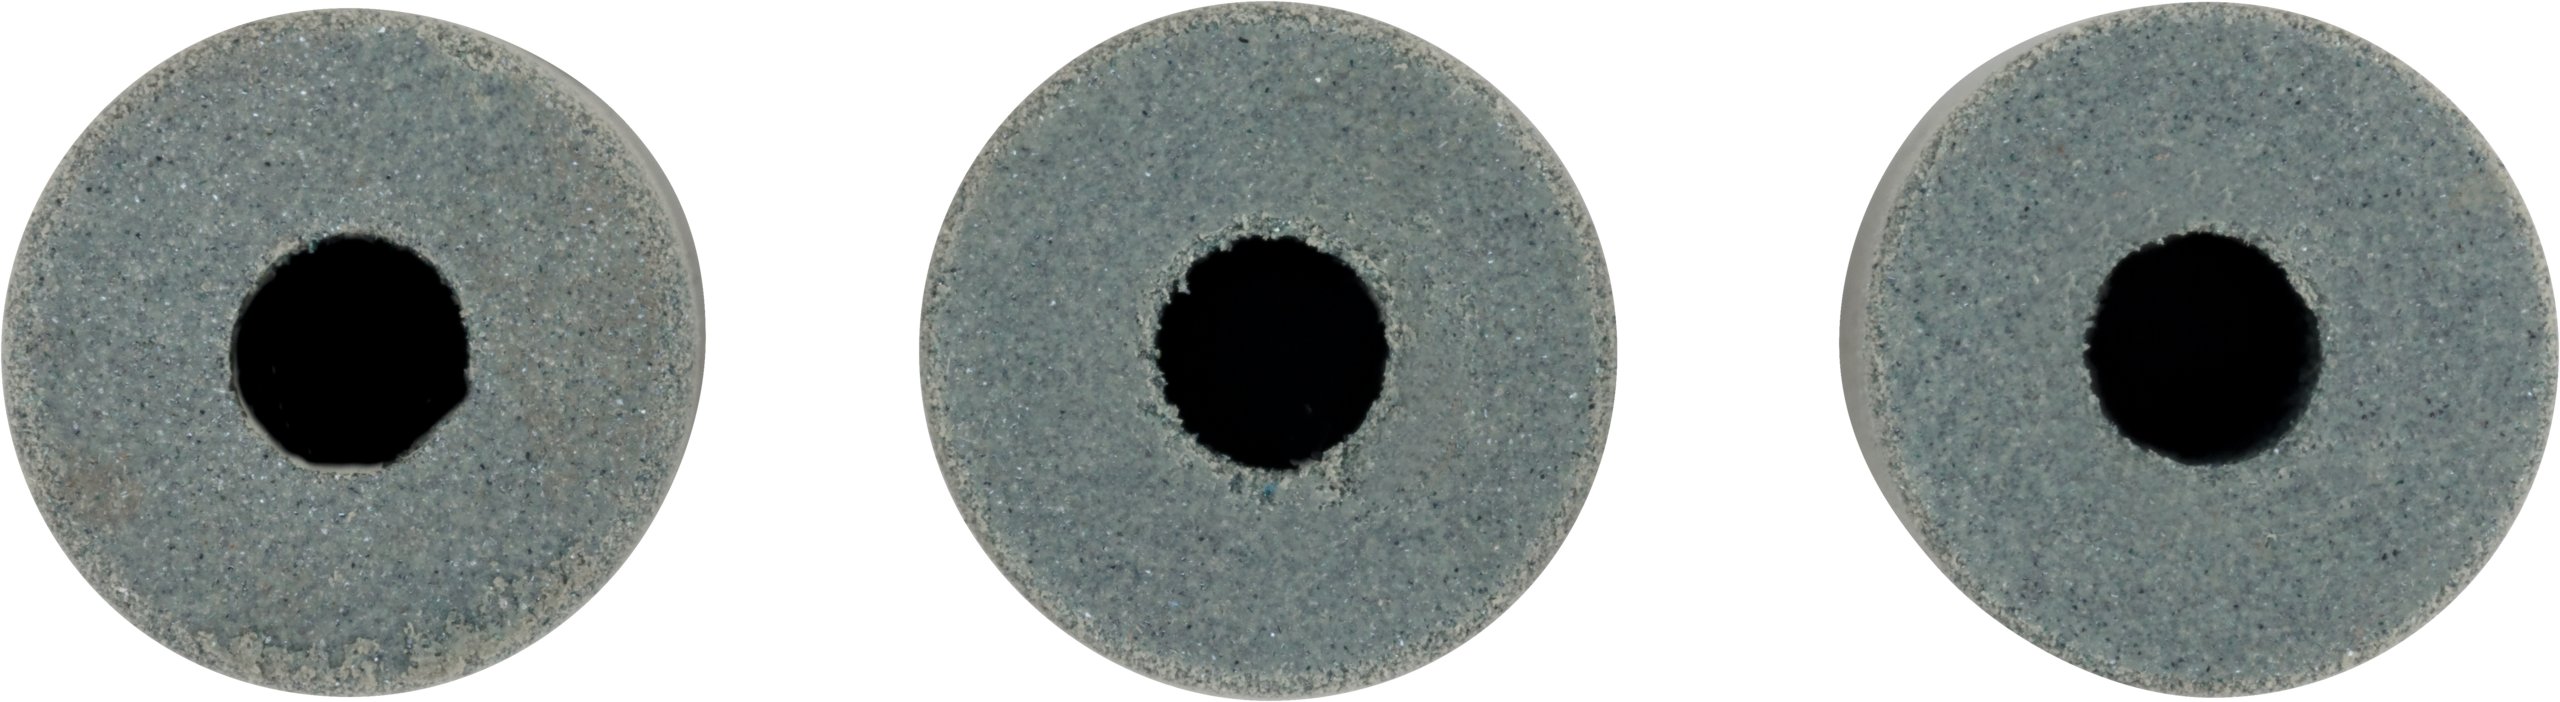 Pacific Abrasives 1" x 1/2" Silicone Inside Ring Cylinder 220 Grit 